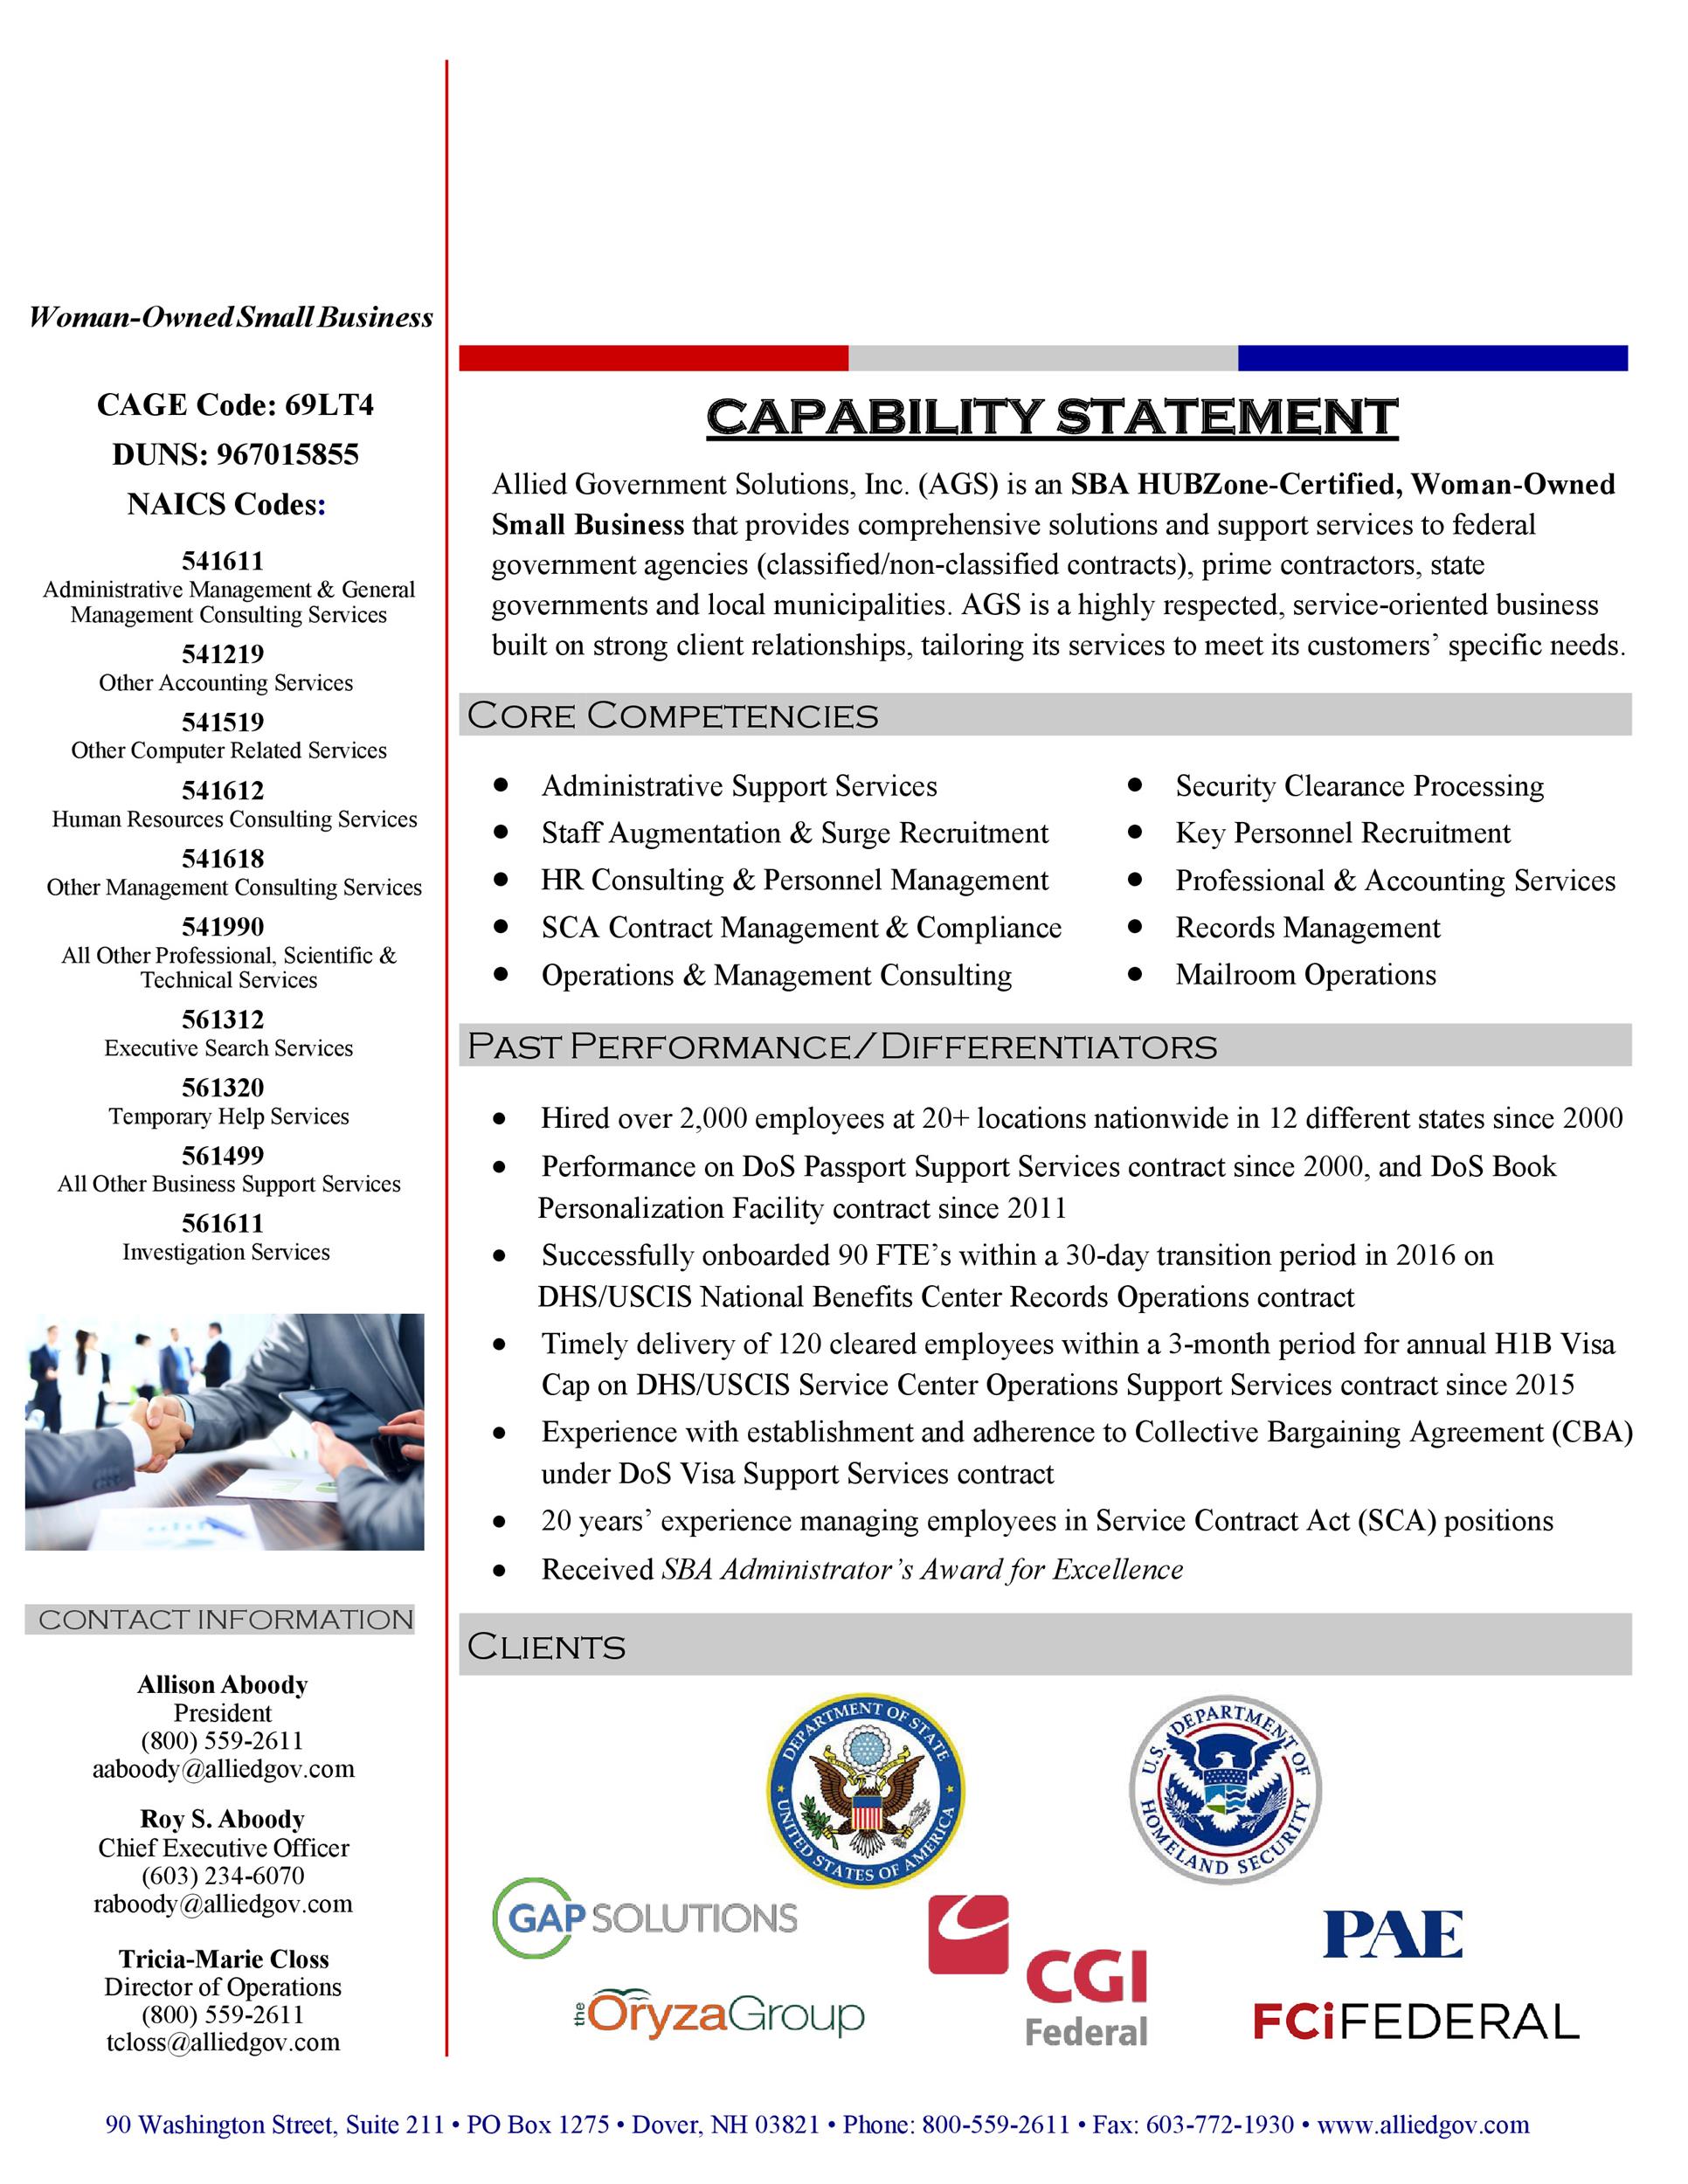 39 Effective Capability Statement Templates (+ Examples) ᐅ TemplateLab